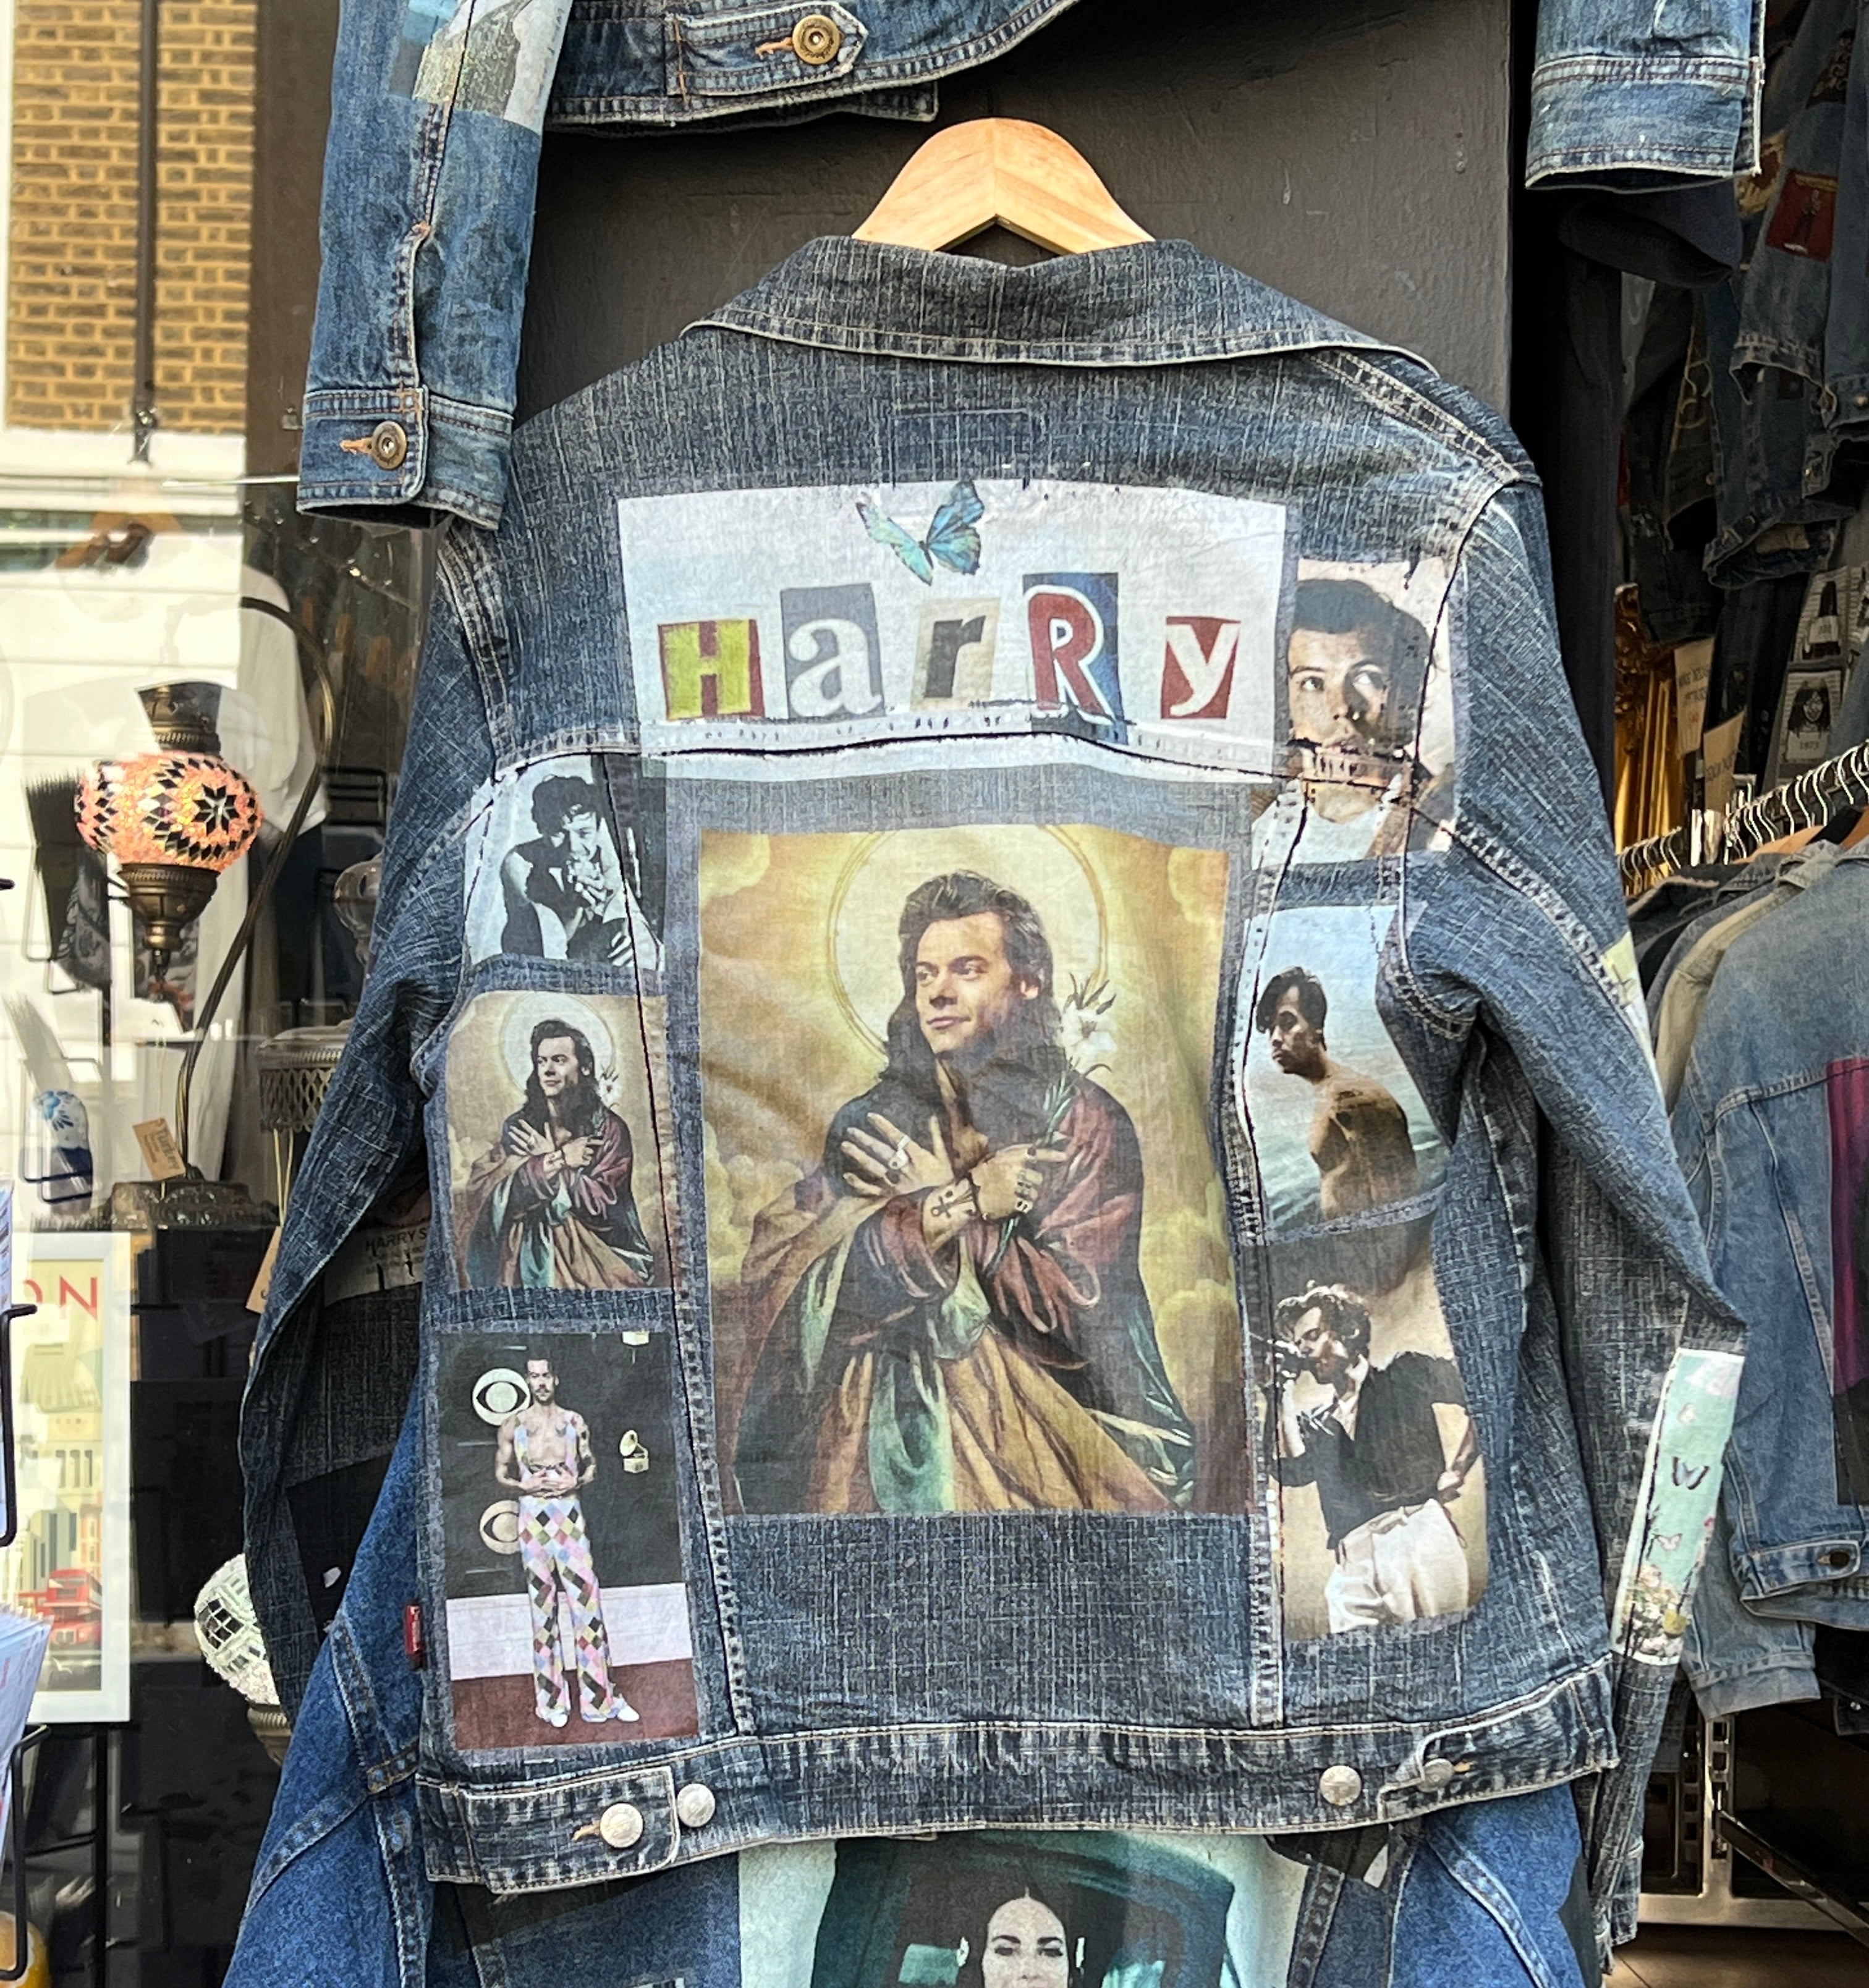 Saw this Harry Styles denim jacket in Nottingham.